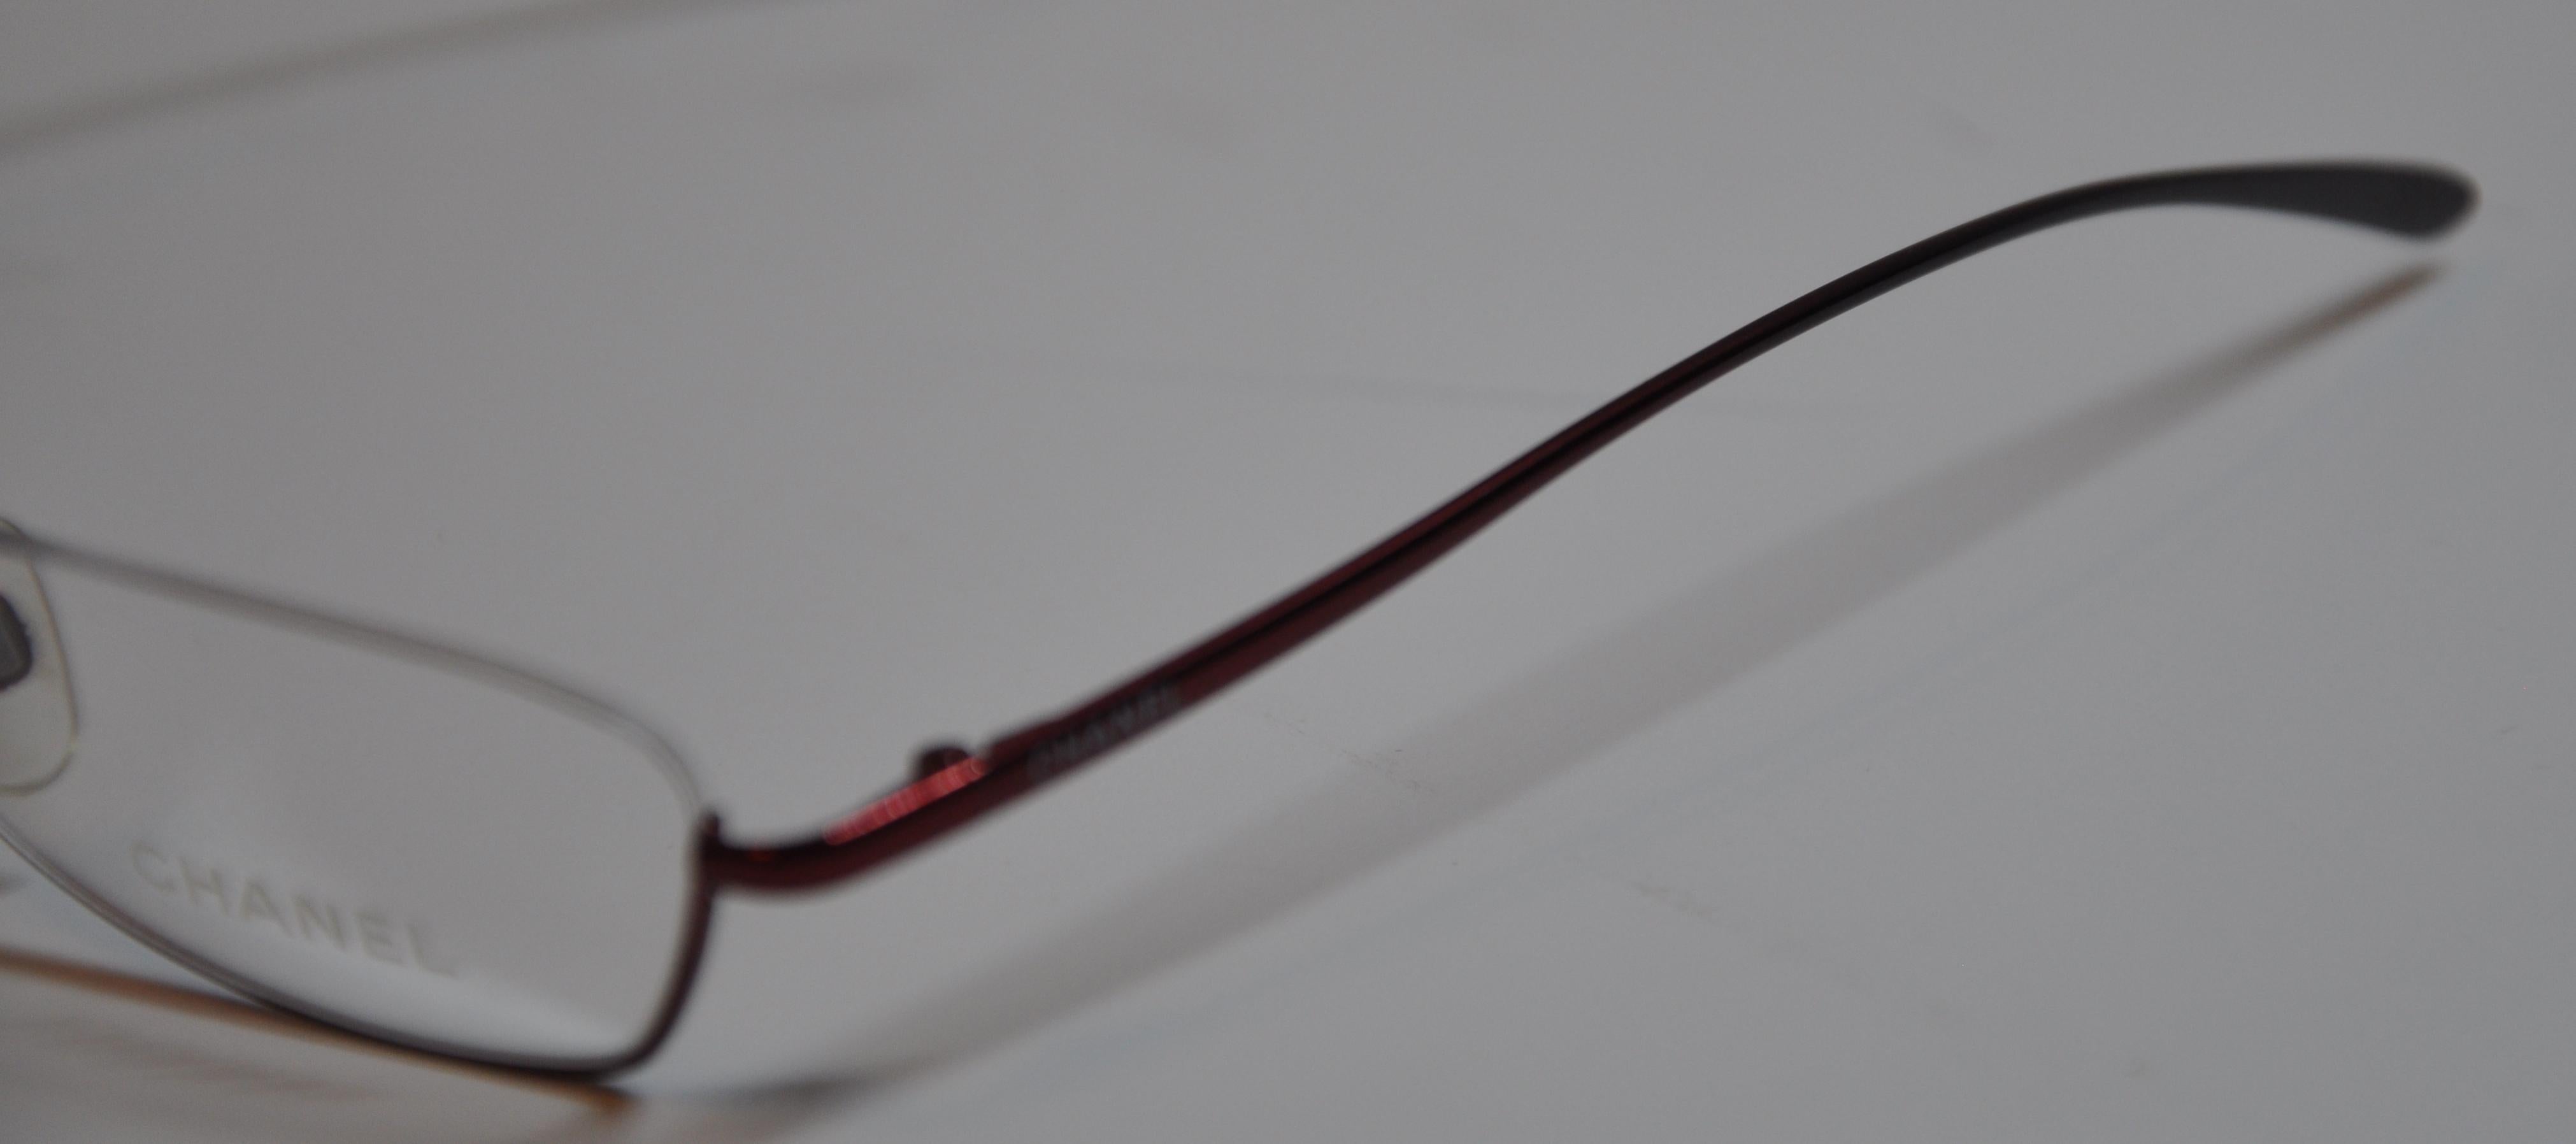        Chanel wonderfully elegant titanium iridescent cranberry weightless half-frame reading glasses are detailed with curved corners in front. The arms are nicely curved for a more comfortable fit. The front measures 5 1/2 inches across,  height